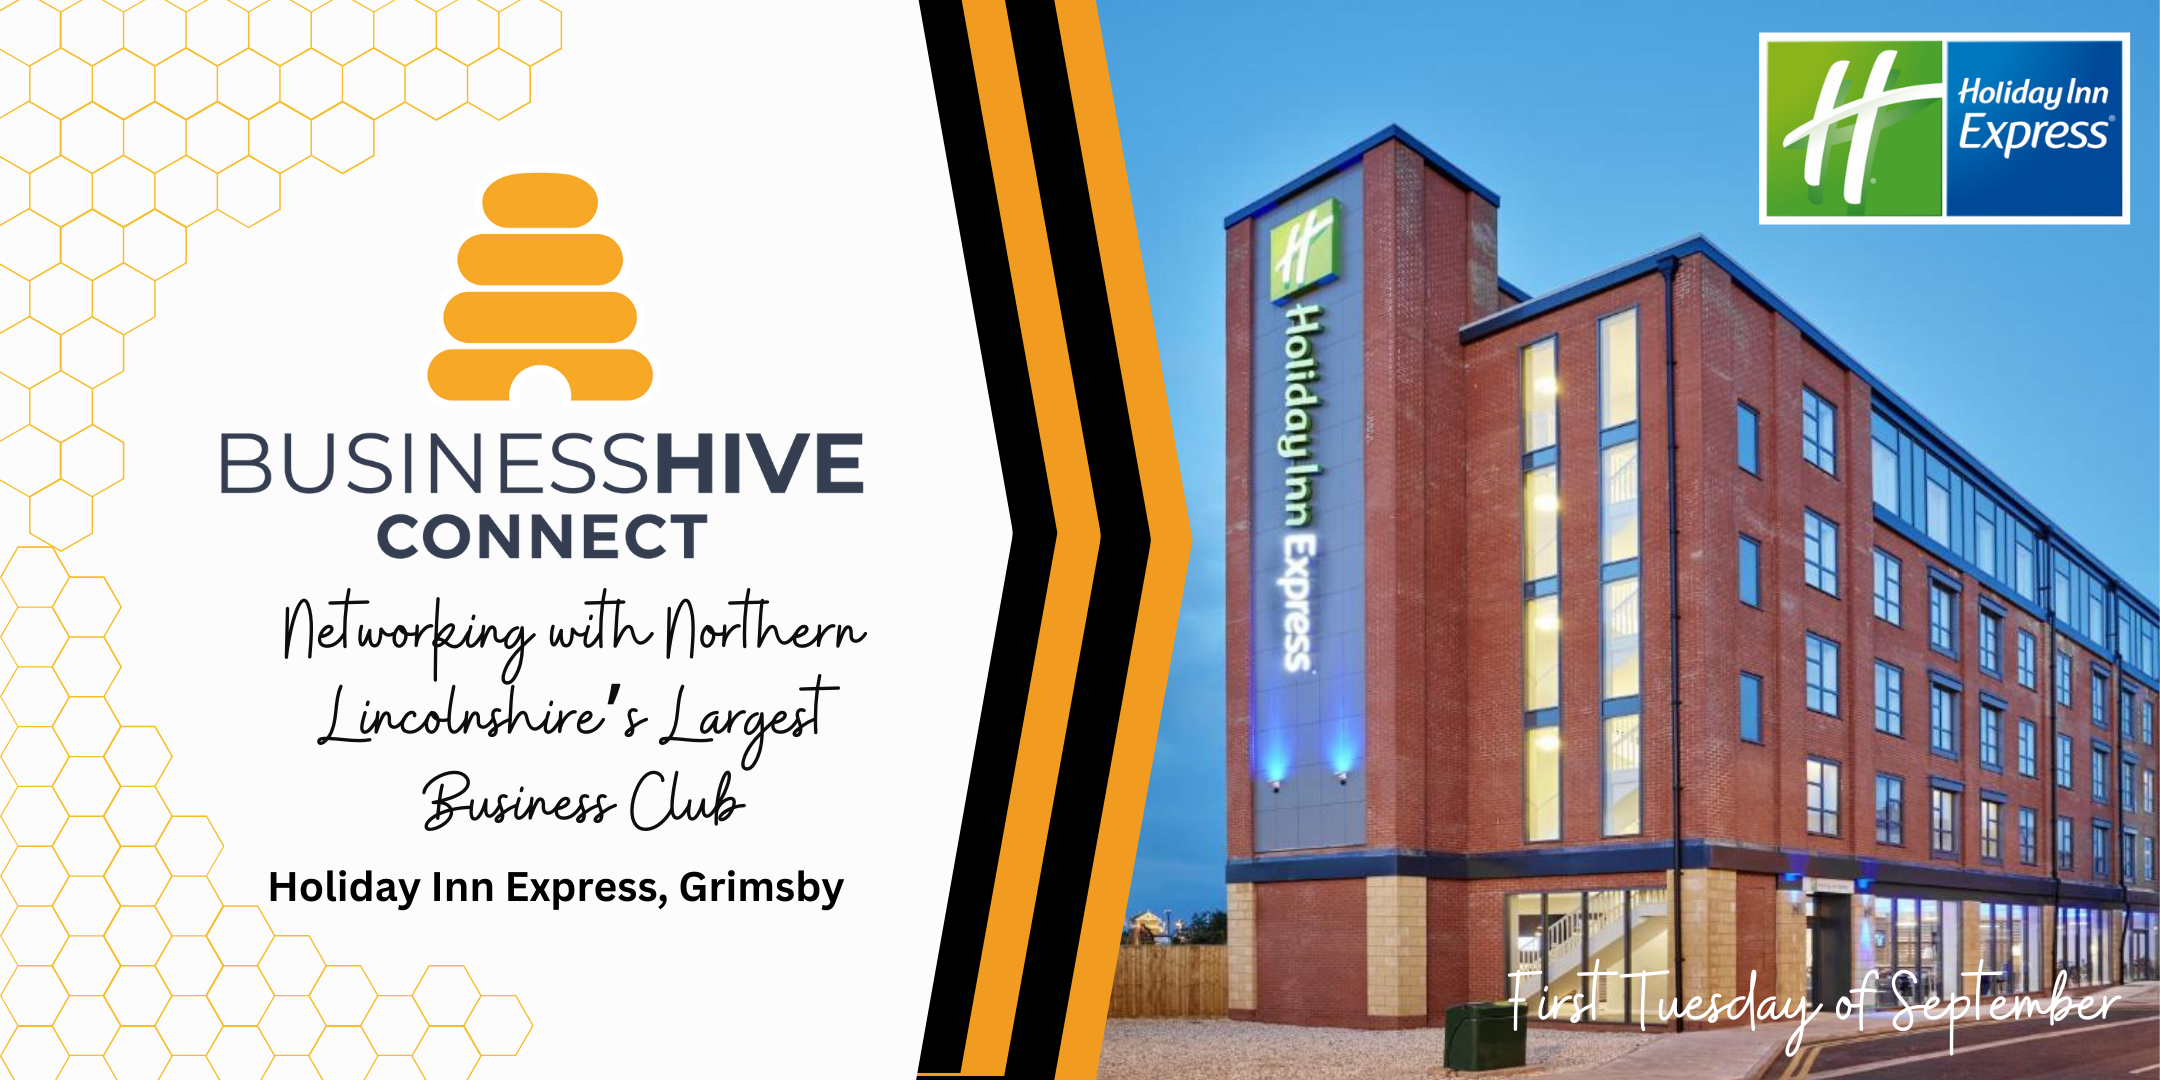 Flyer for Business Hive Connect networking event at Holiday Inn Express in Grimsby. Text indicates it is Northern Lincolnshire’s largest business club. Image includes a photo of the Holiday Inn Express hotel. Join us and network with industry leaders!